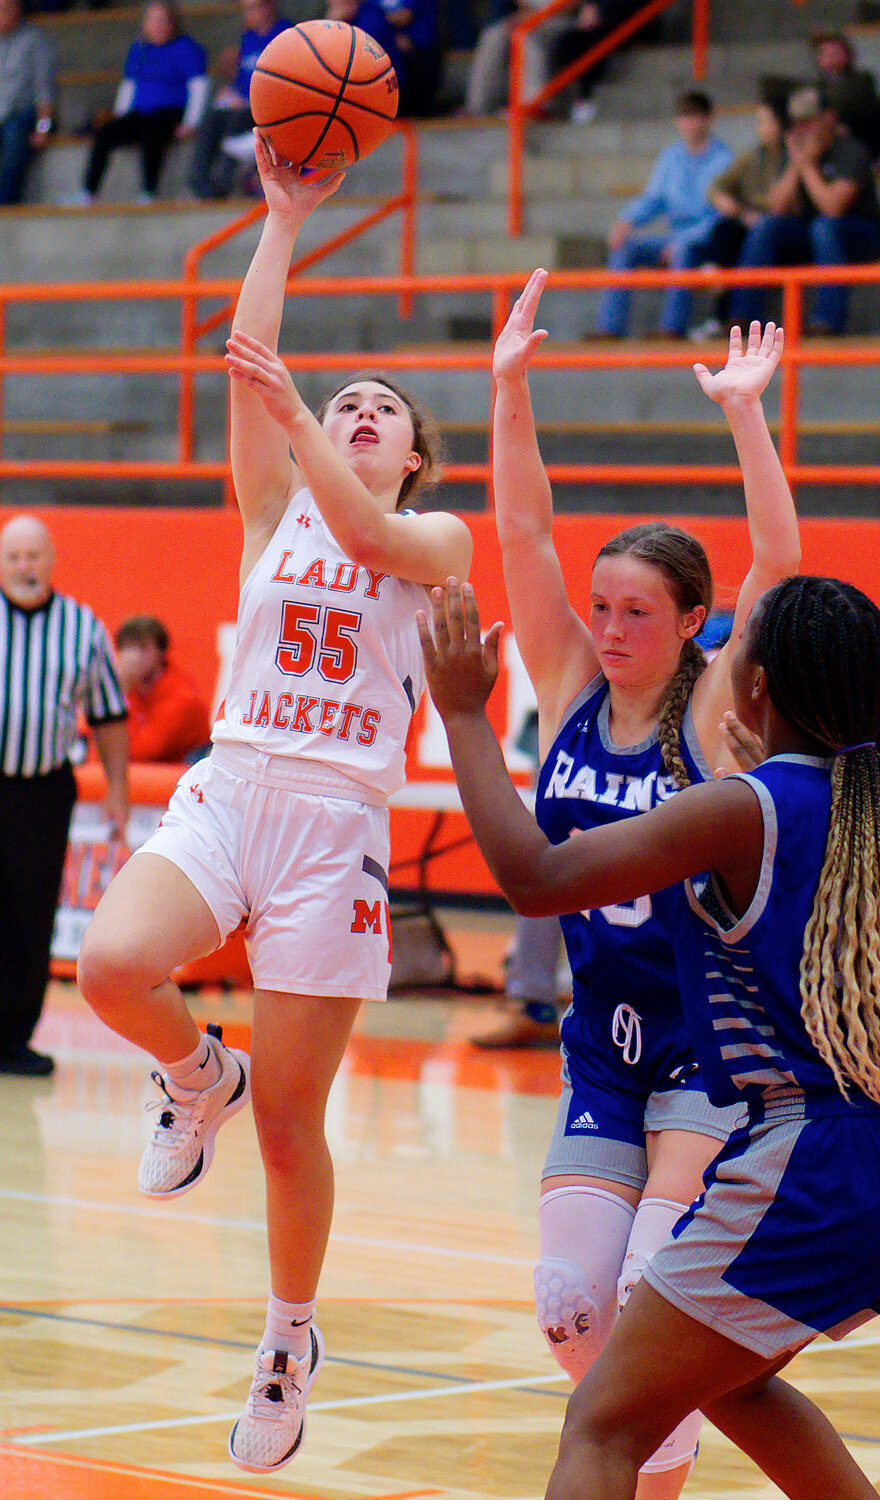 Sophia Hogue puts up a teardrop floater in the lane. [more hoops highlights here]